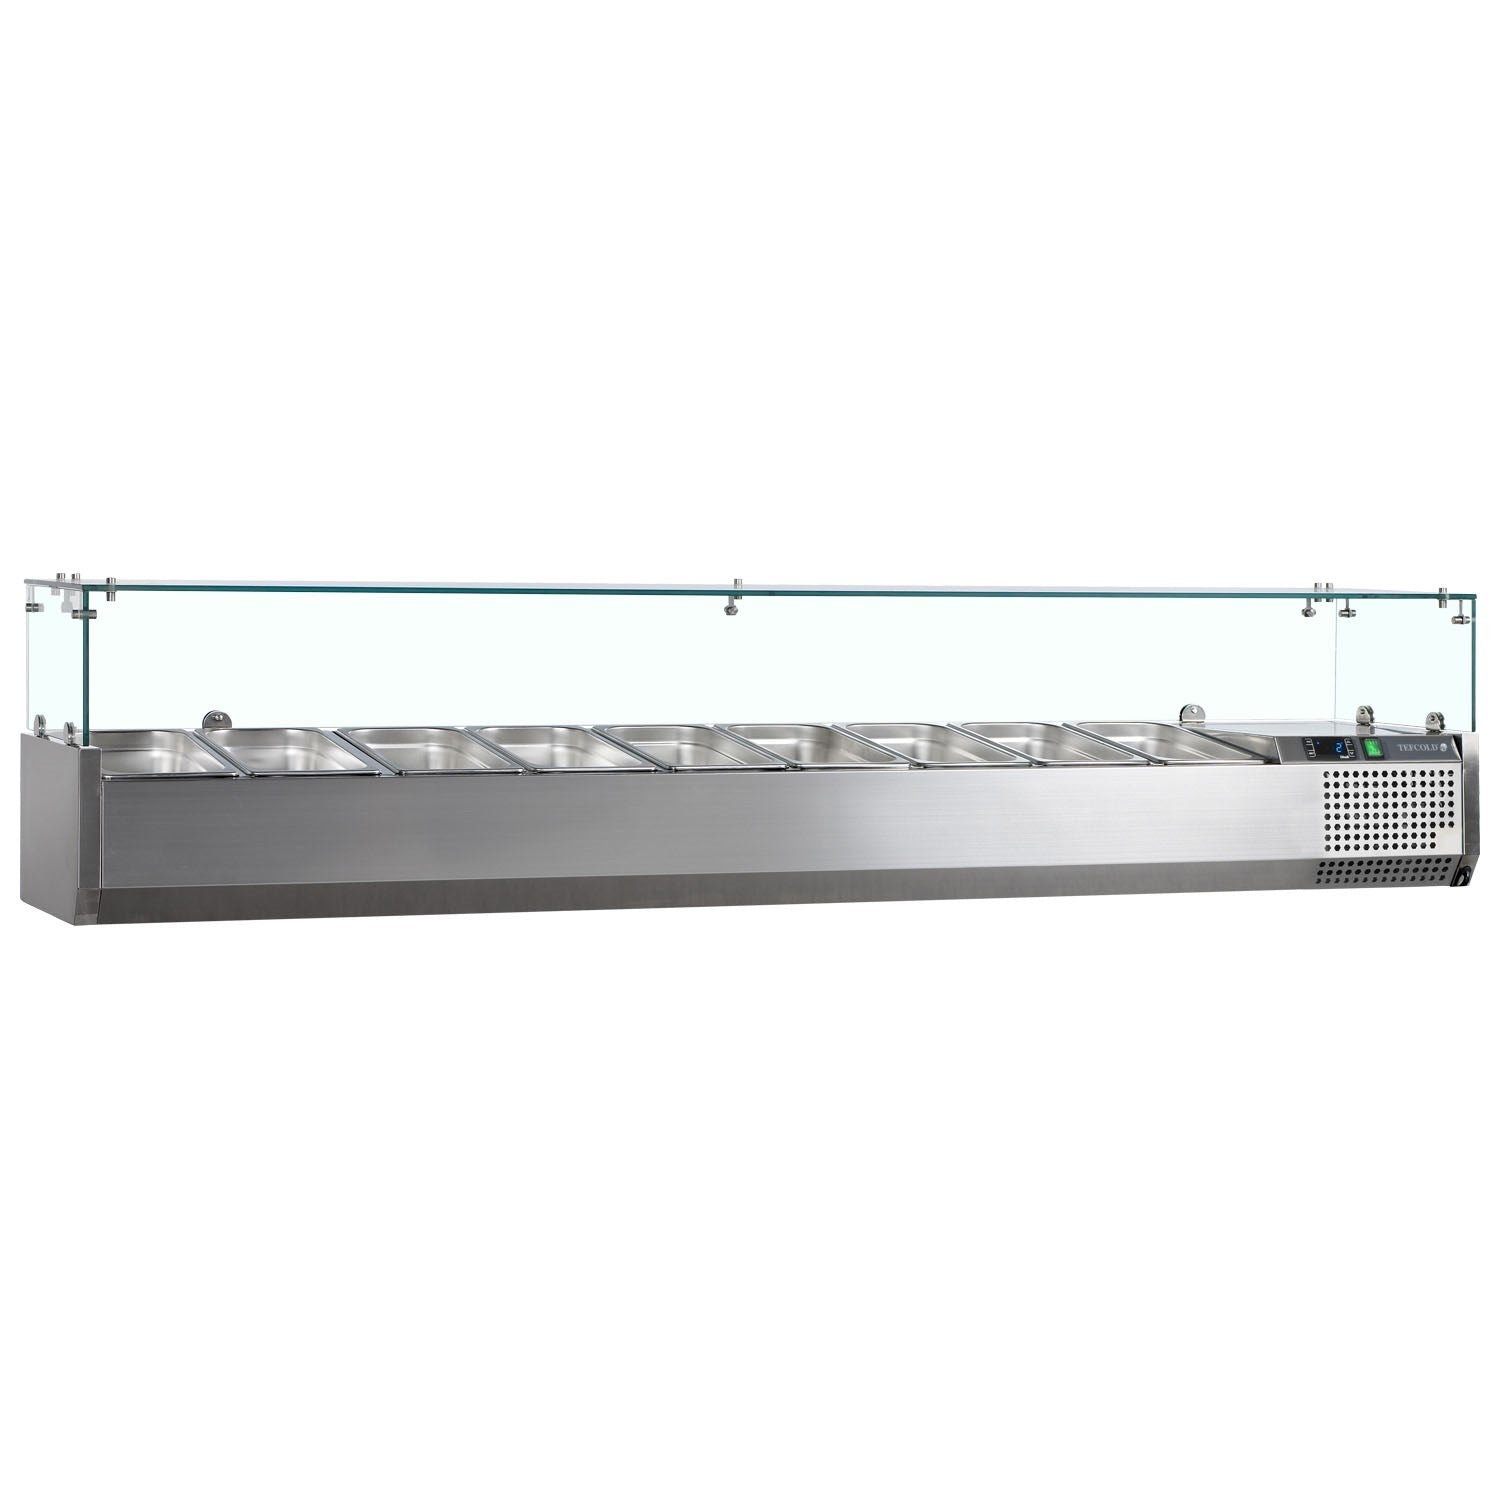 TEFCOLD  RANGE  GASTRONORM  TOPPING SHELF WX1500HX435DX335.Product Ref:00843.Model:GVC33. 🚚 1-3 Days Delivery